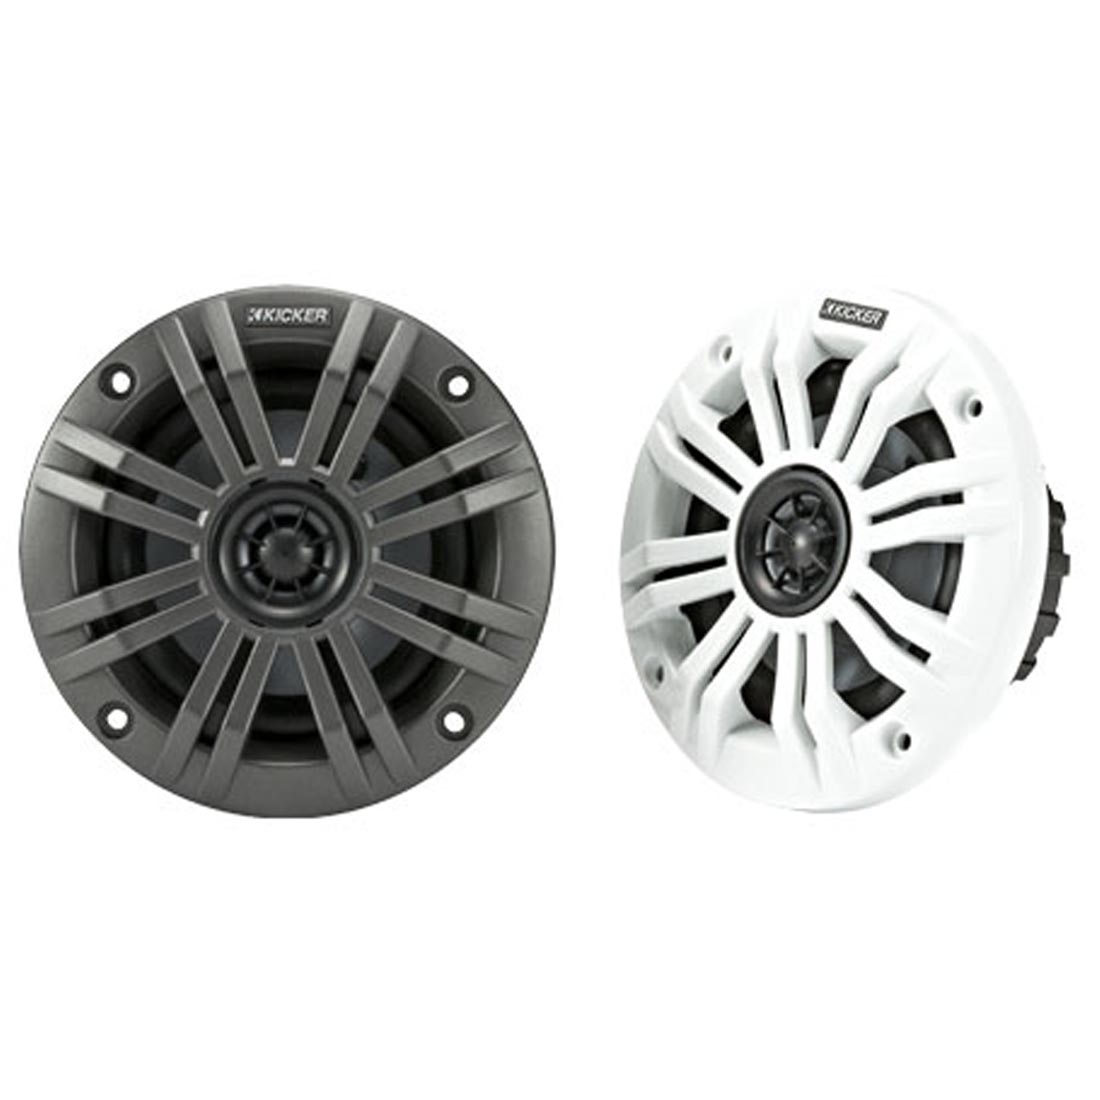 Kicker 45KM44 4″ 2-Way 4-Ohm Marine Coaxial Speakers with Charcoal and White Grilles